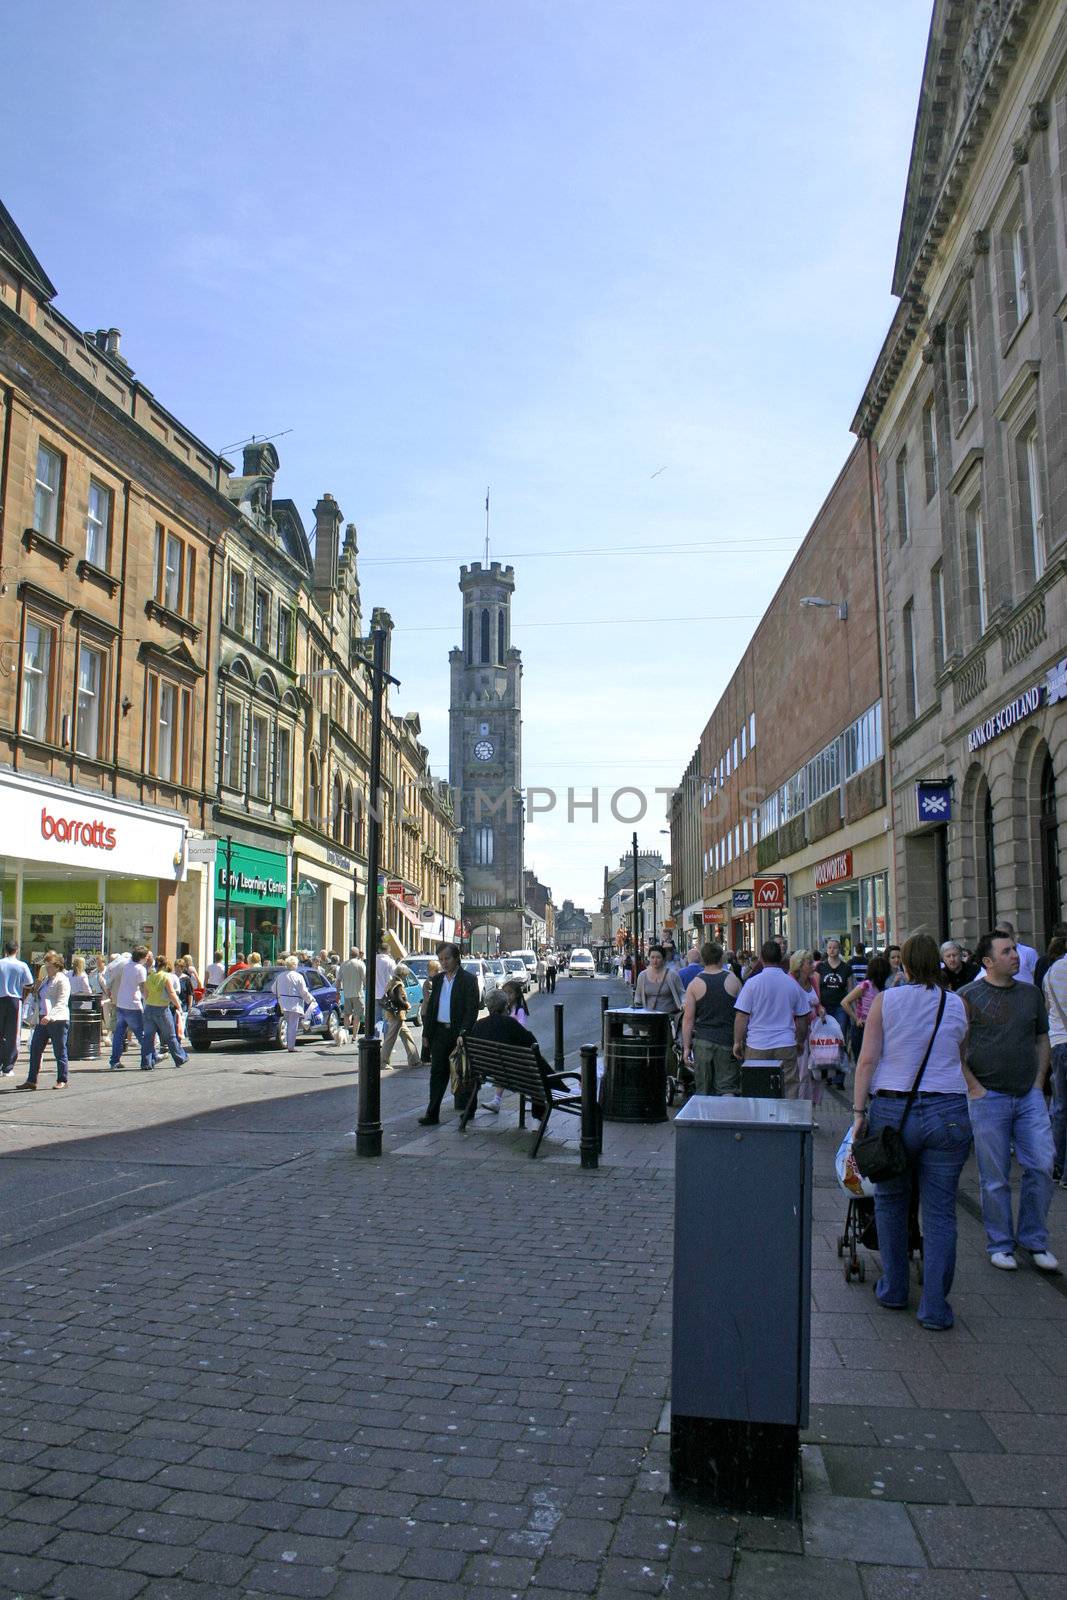 Shoppers in a Car Lined Street Ayr Scotland